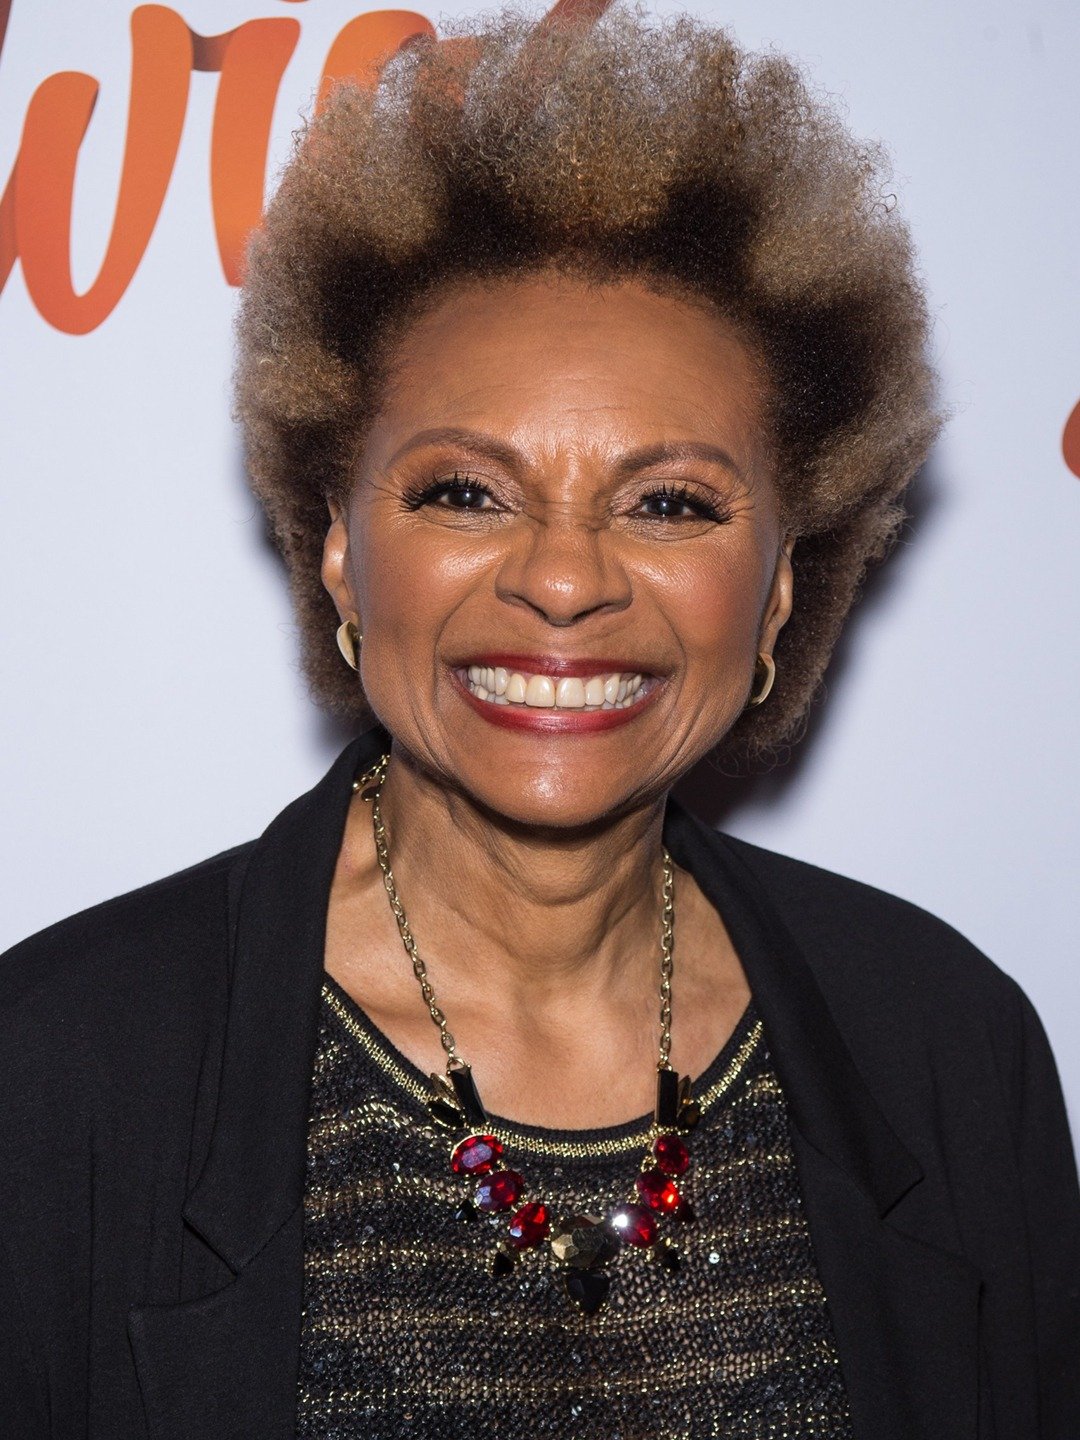 How tall is Leslie Uggams?